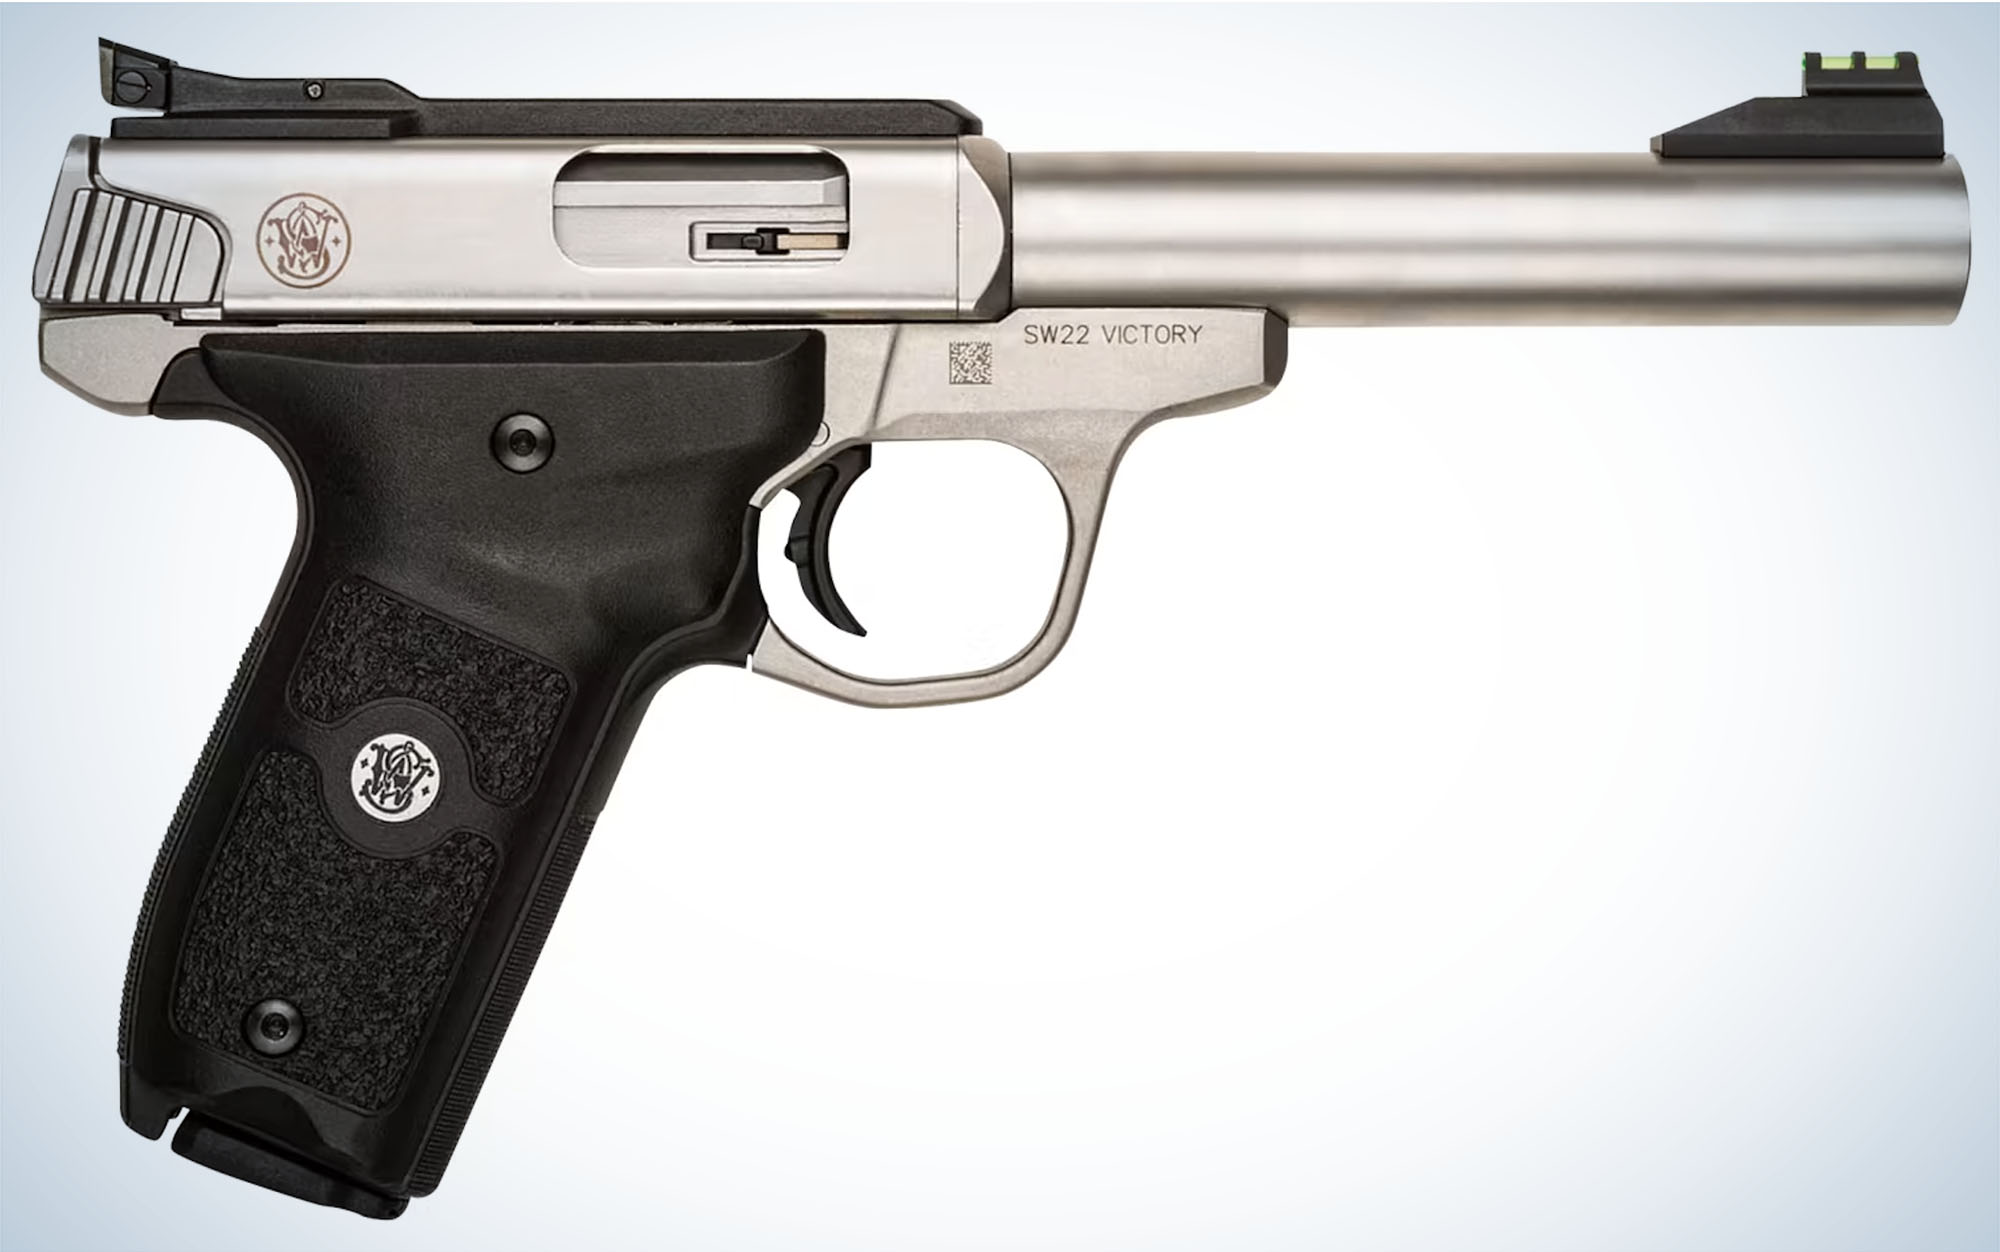 The Smith & Wesson SW-22 Victory is one of the best .22 pistols.